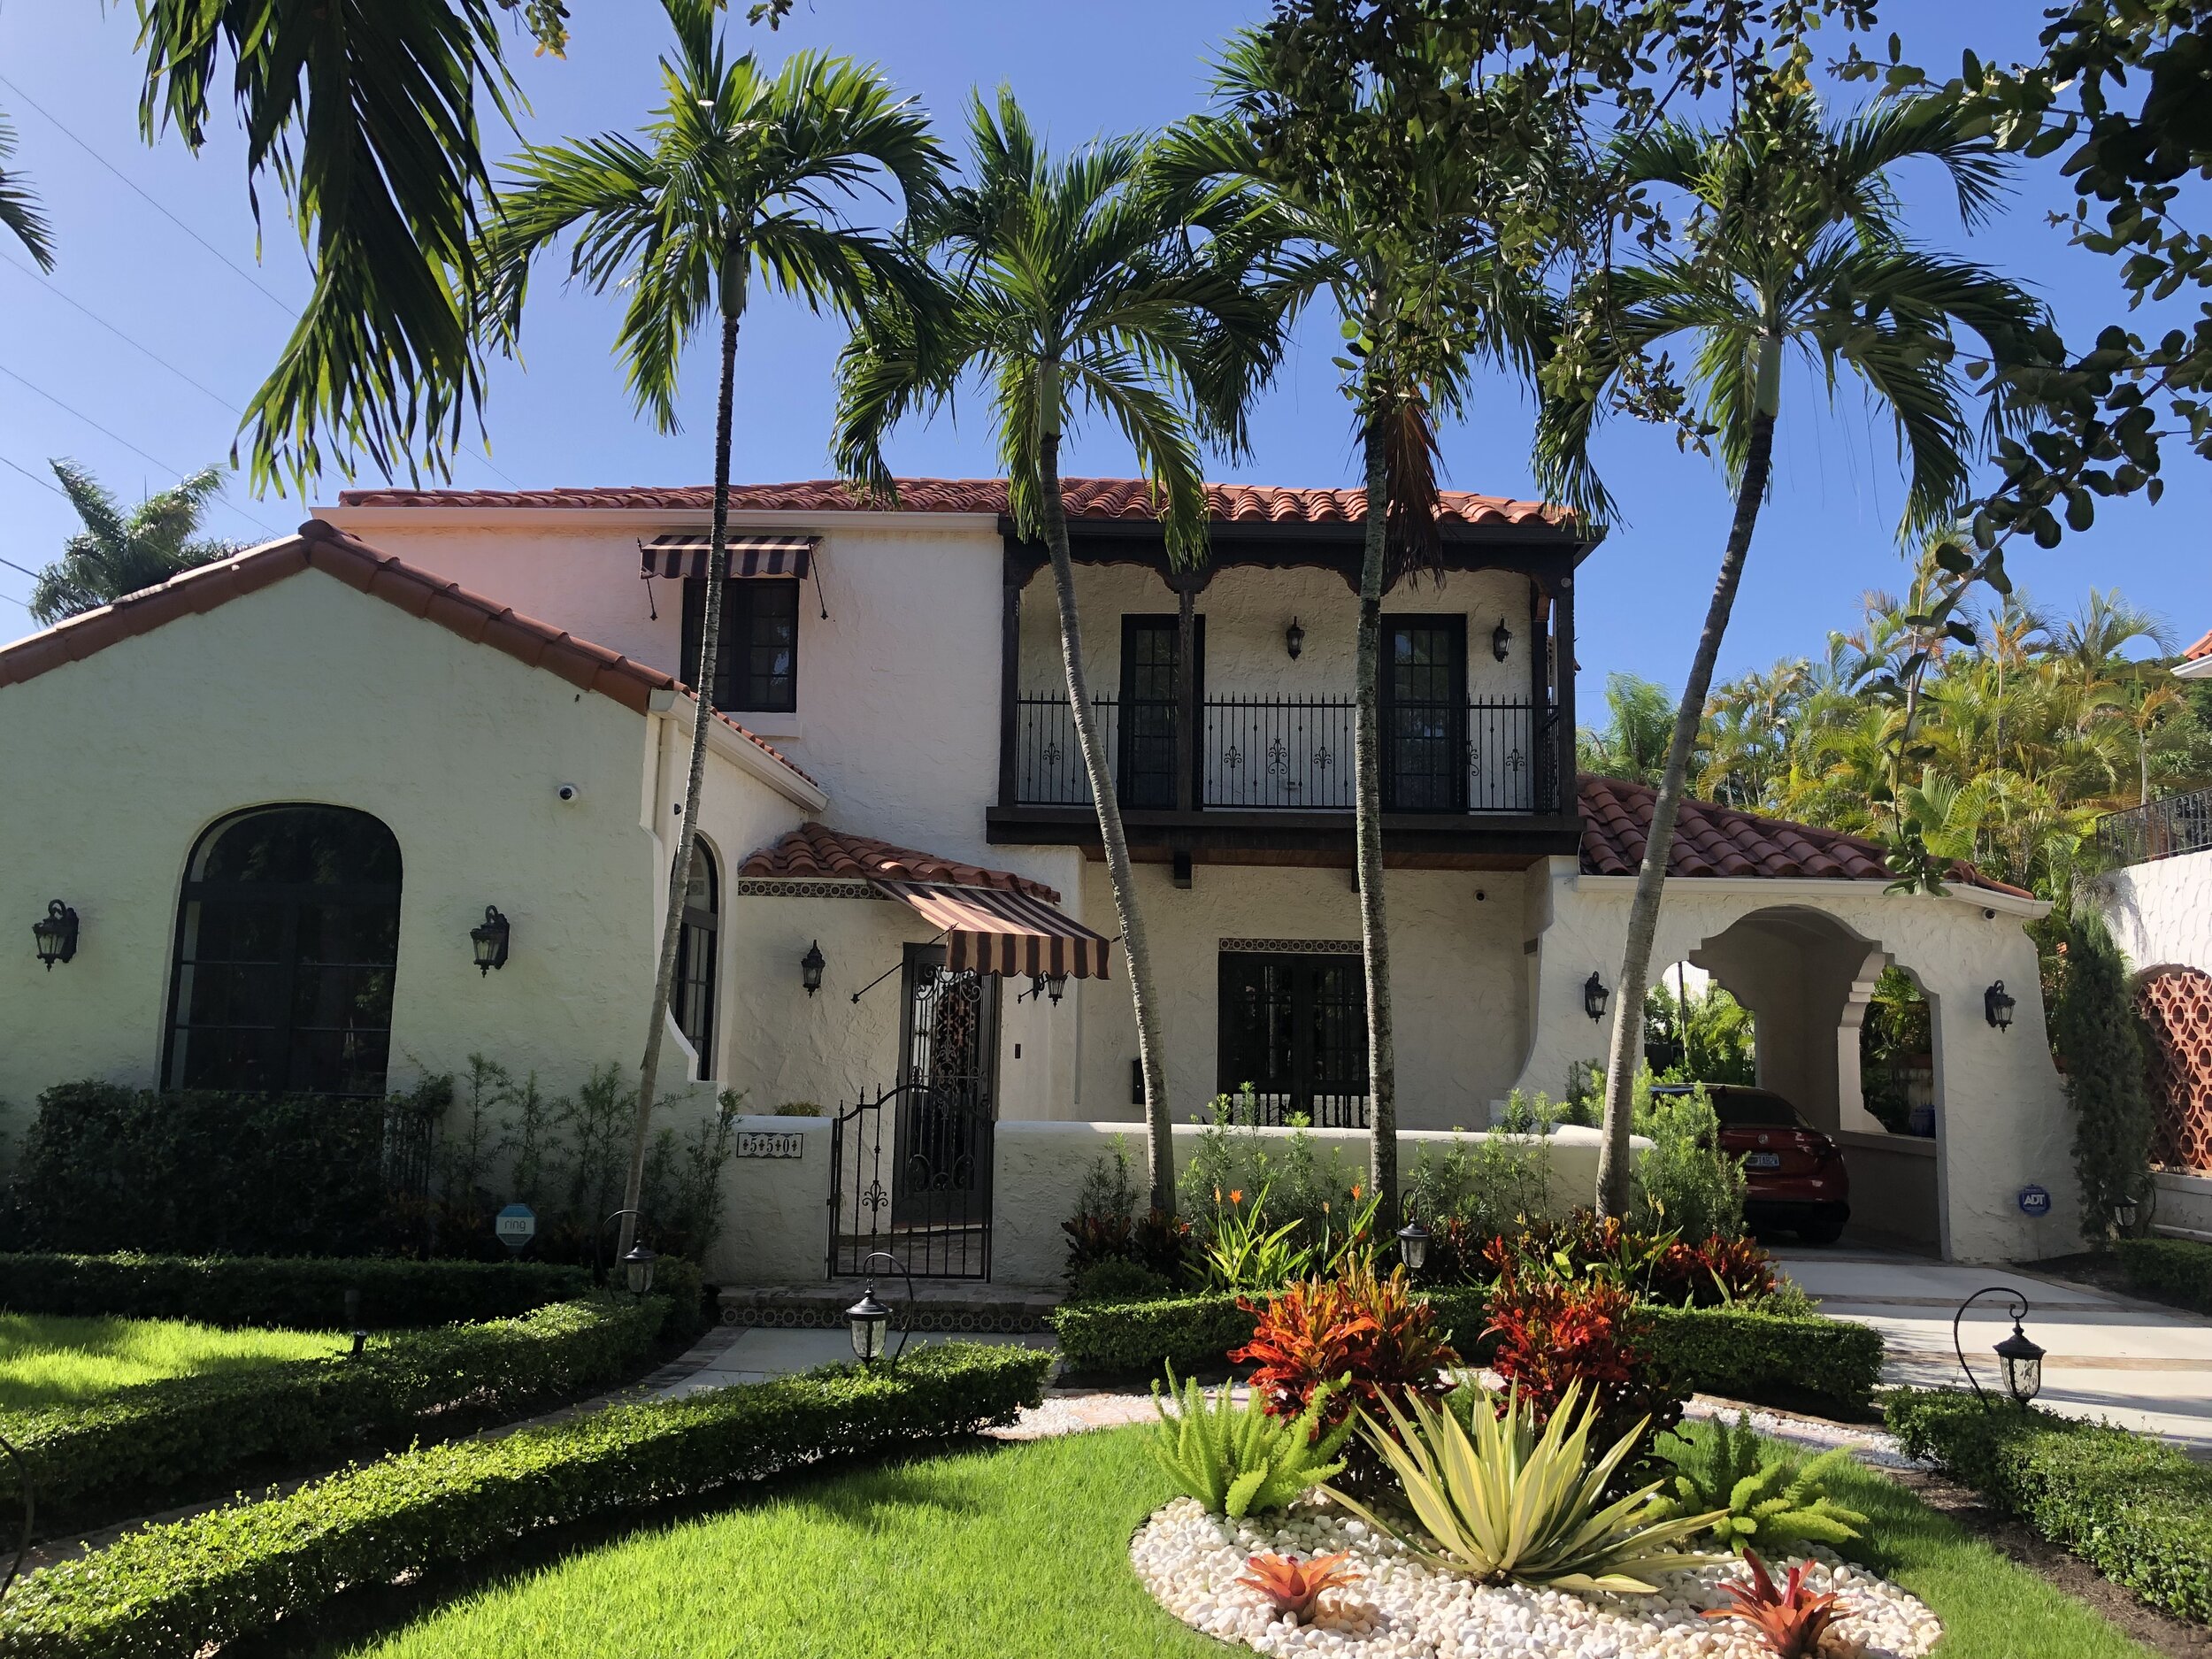 Old Spanish style home in Morningside Miami